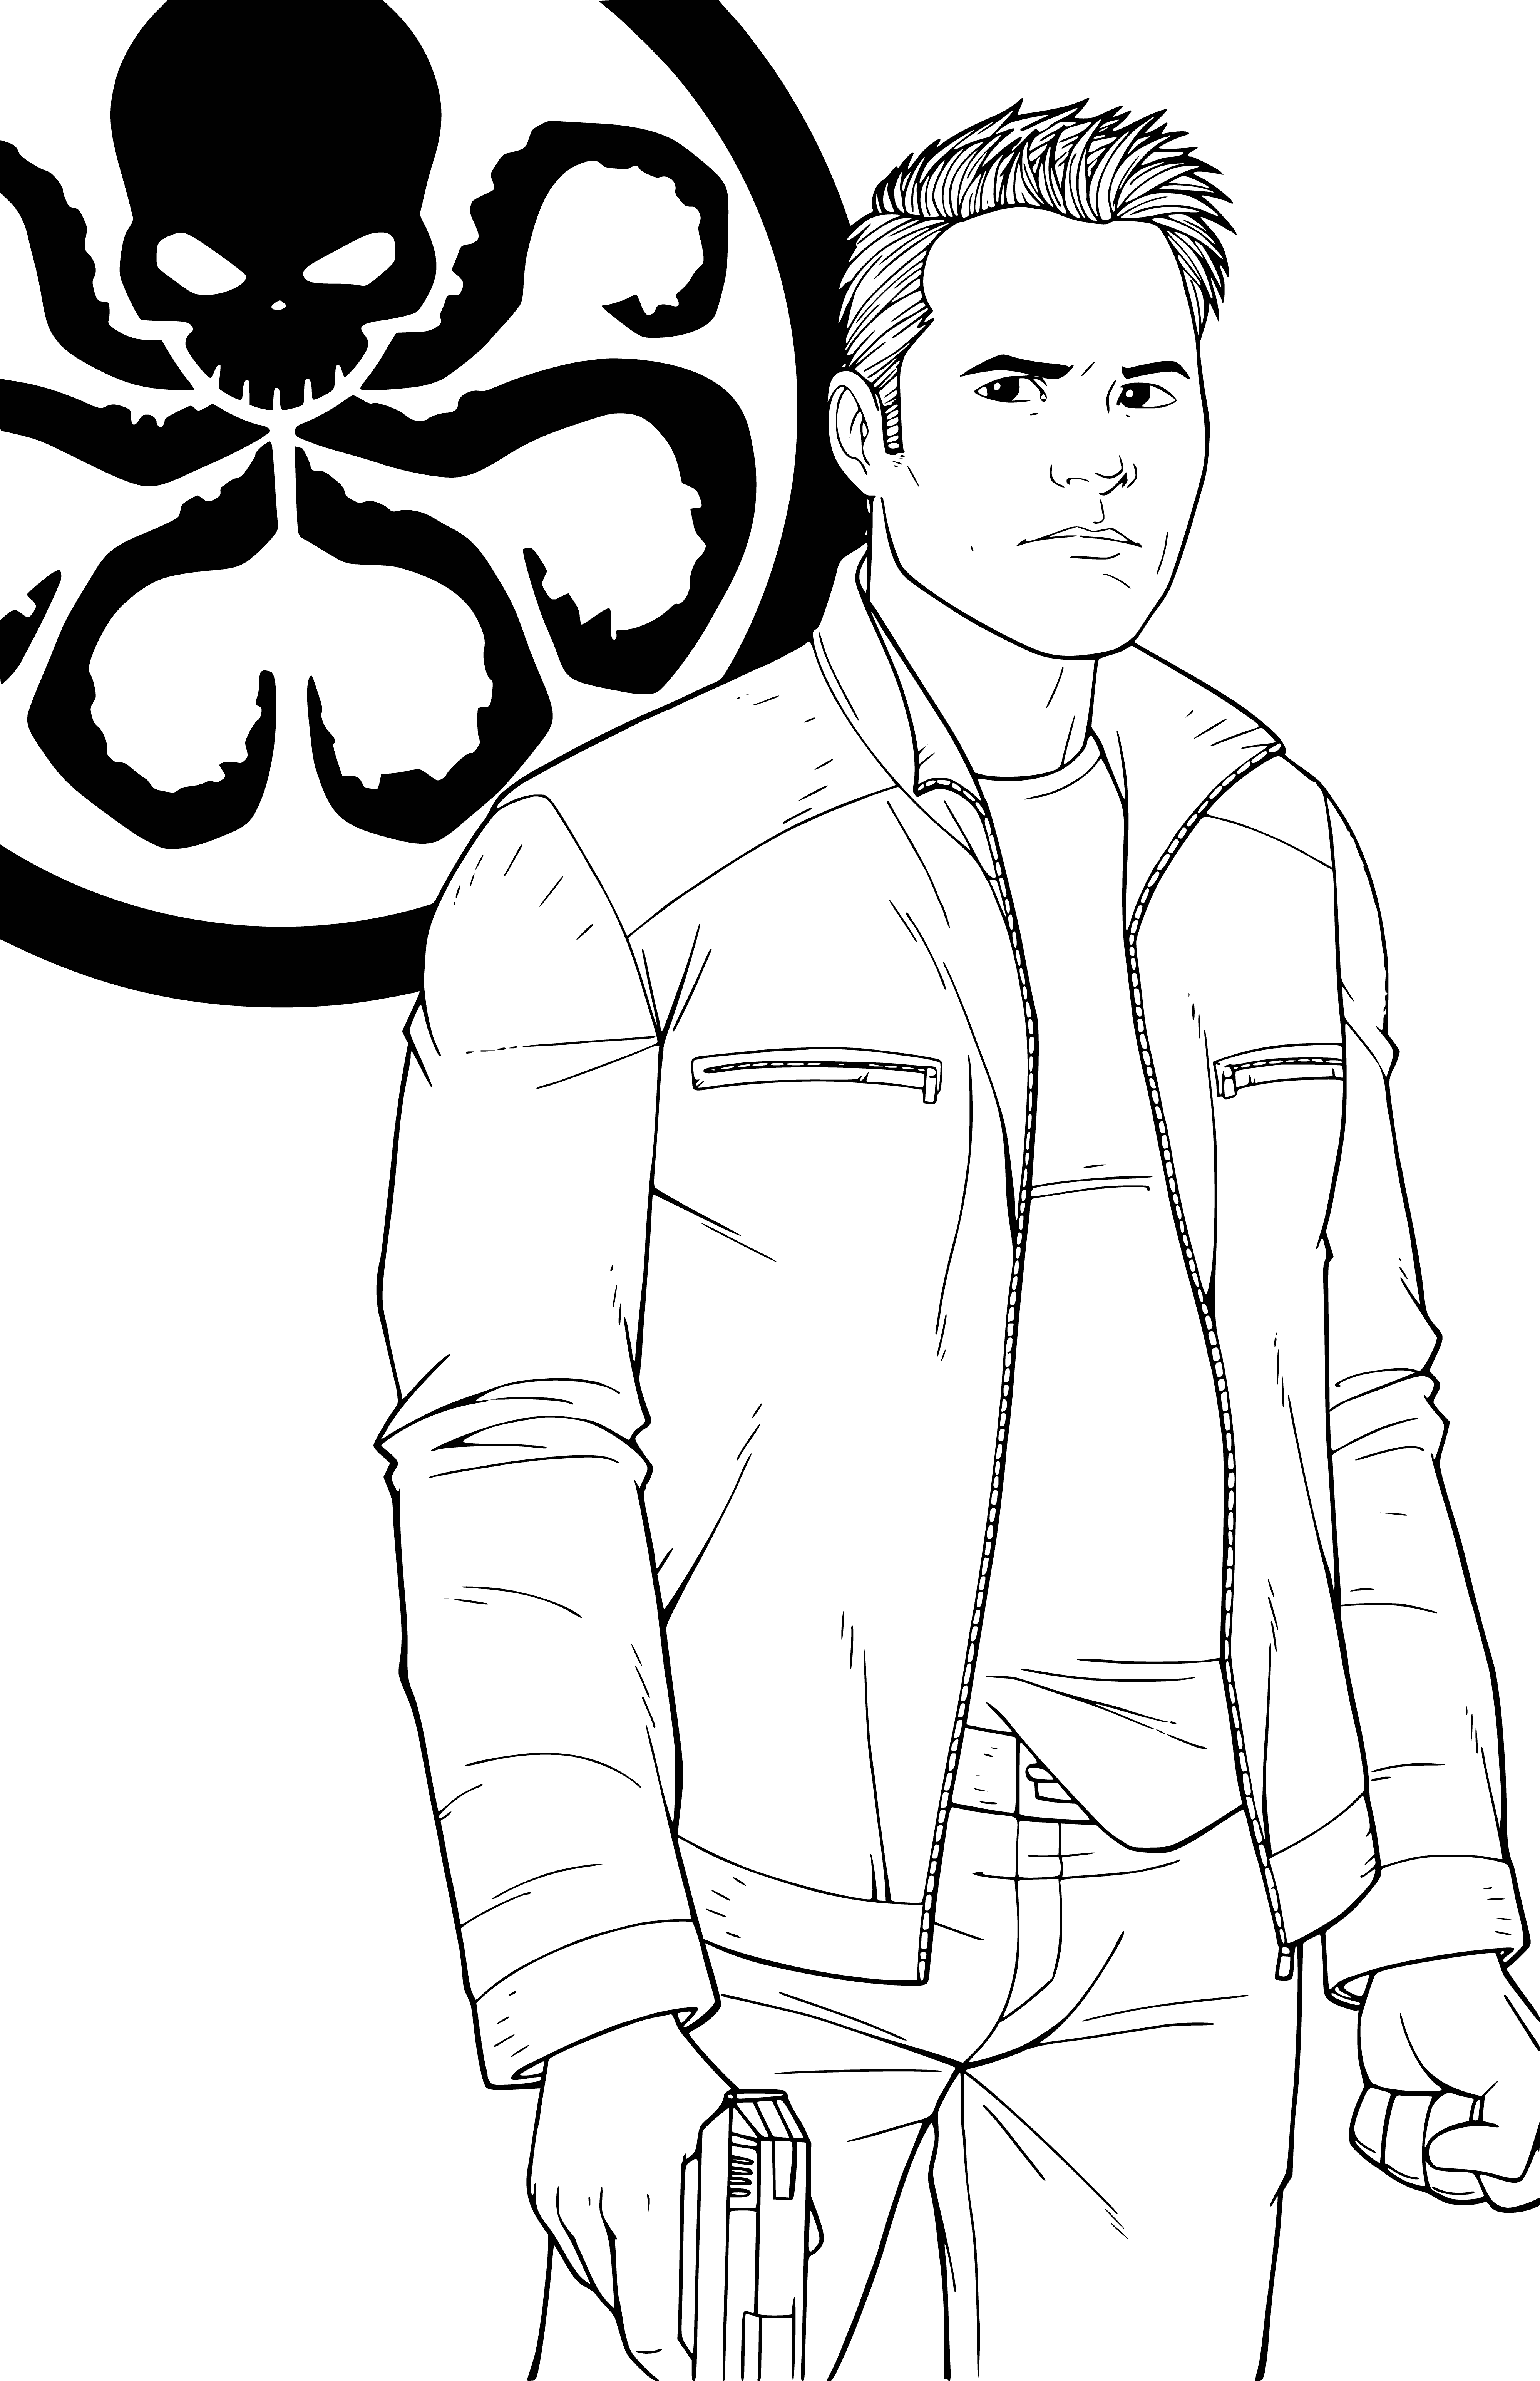 coloring page: Man wearing black shirt with white "S" shield emblem; serious expression; short, dark hair; clean-shaven; looking to side.